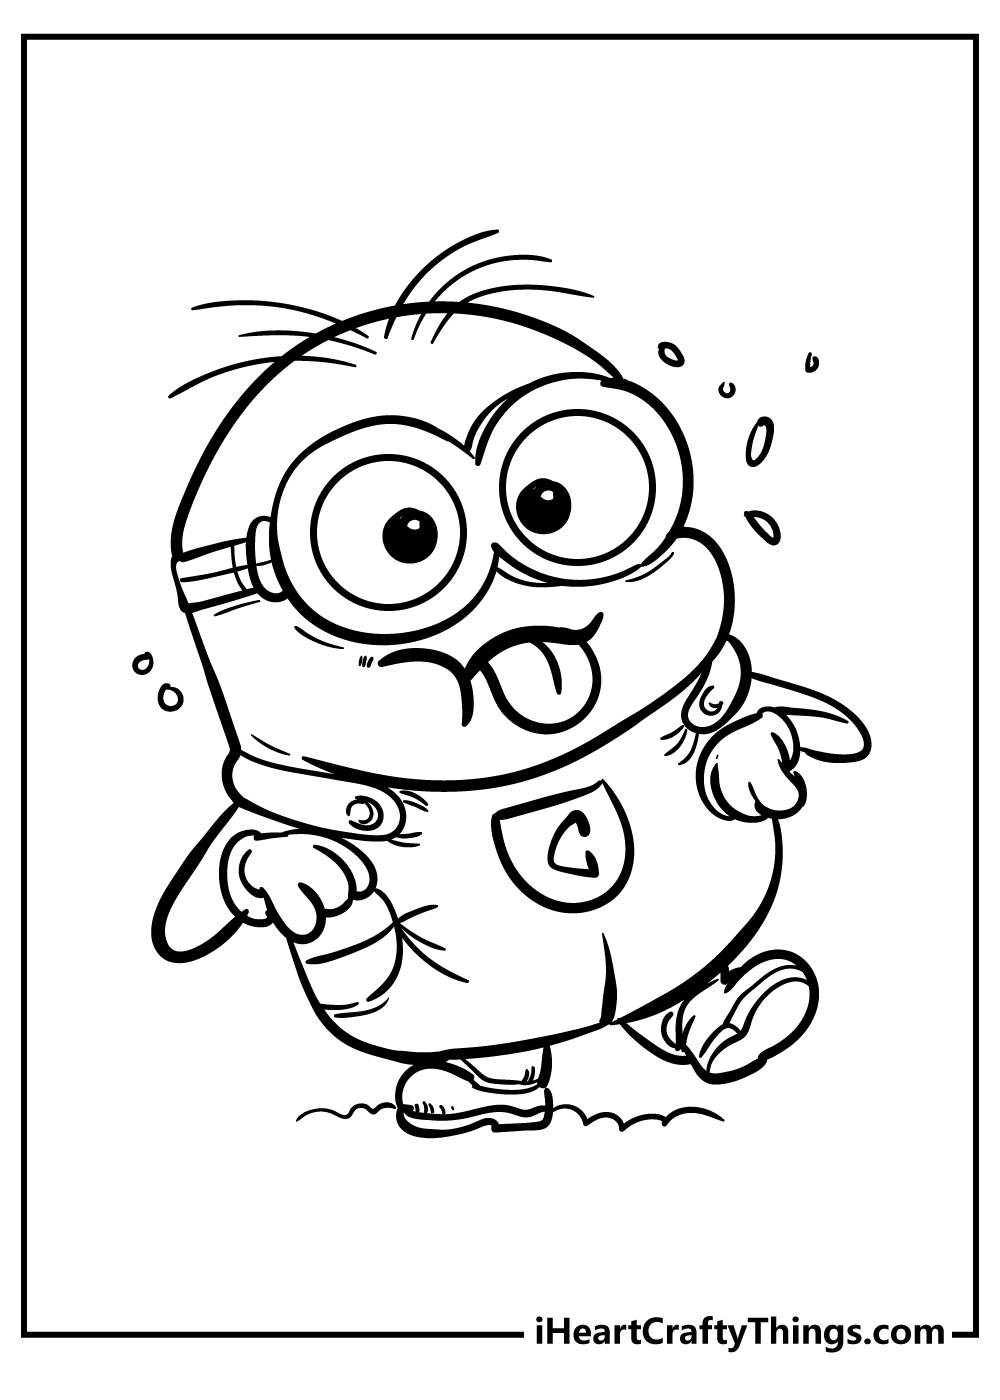 Printable Minions Coloring Pages Updated 20